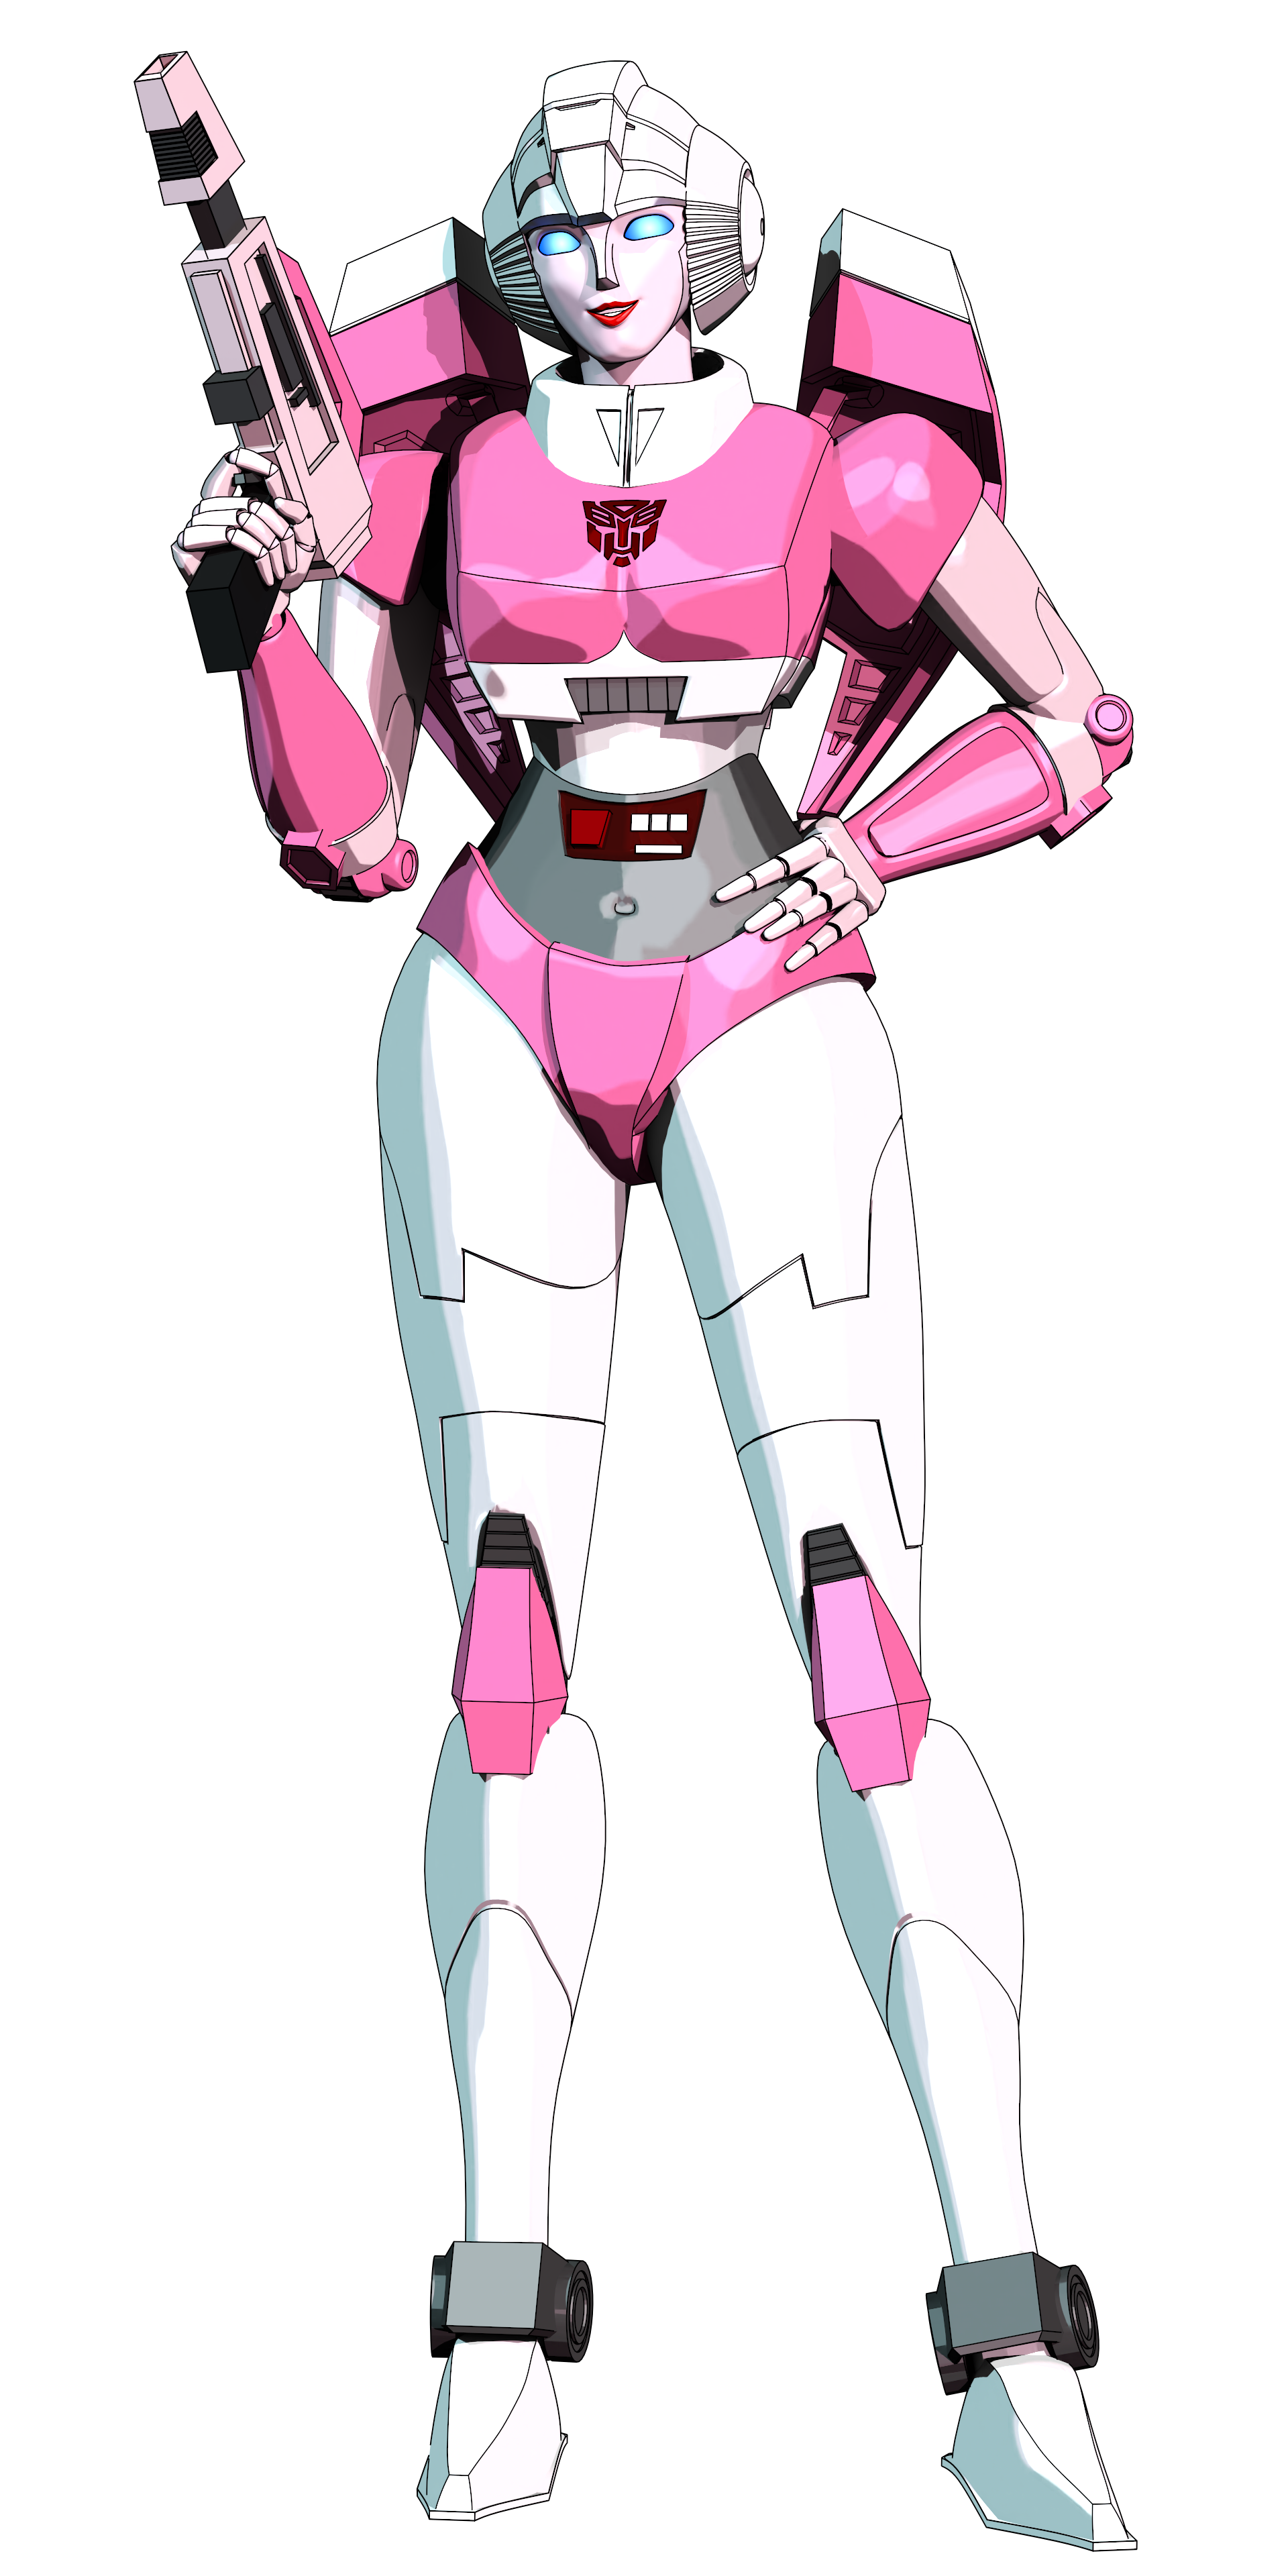 Transformers G1: Arcee 3D model by AndyPurro. Transformers, Transformers girl, Transformers characters